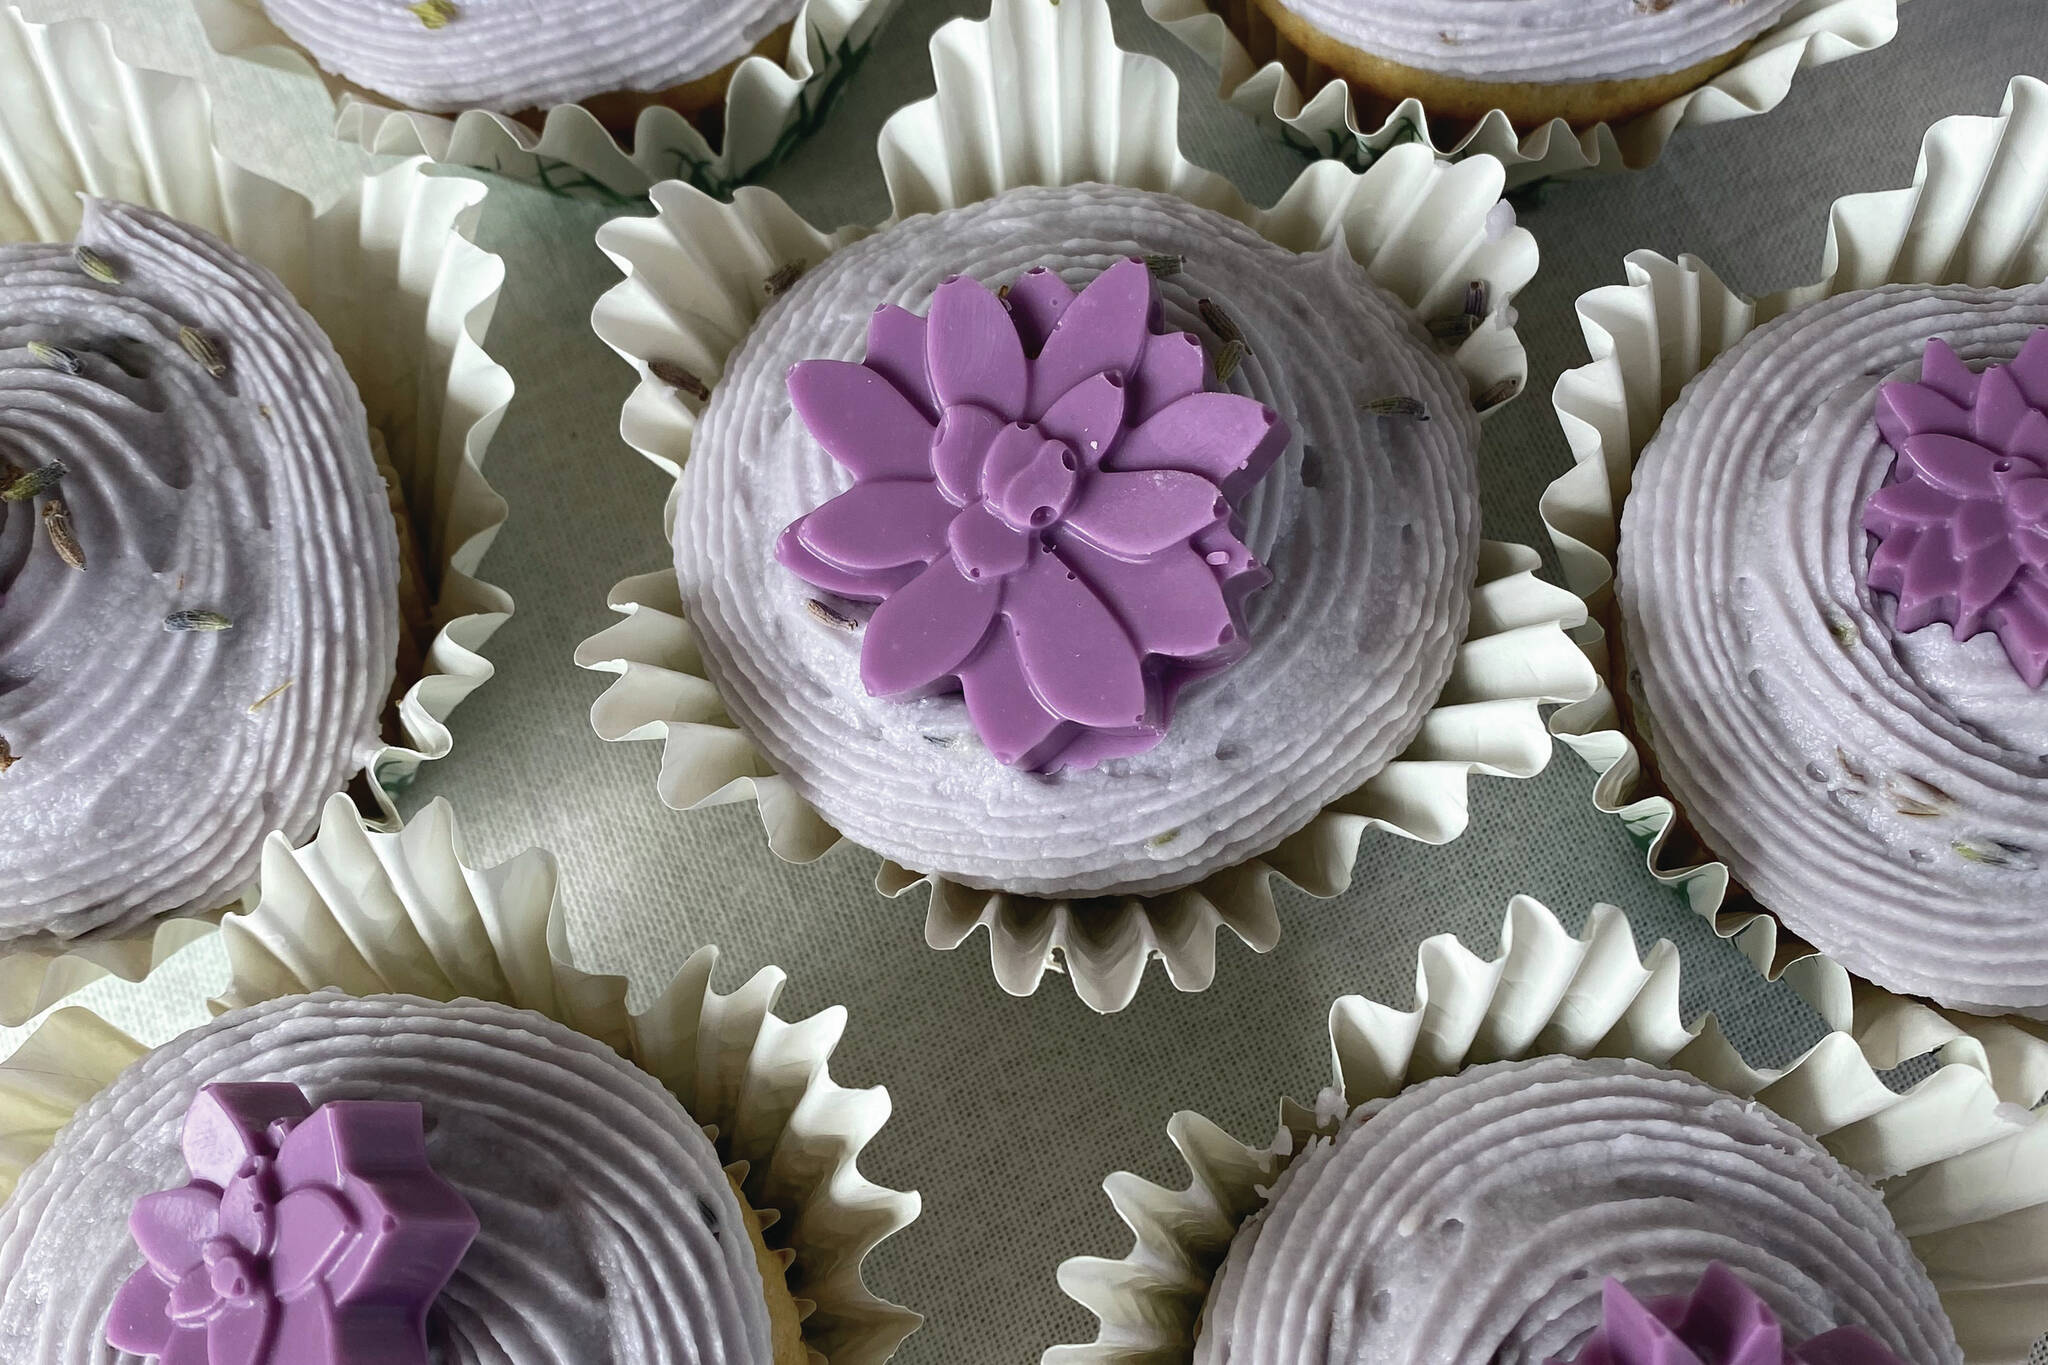 Earl Grey and lavender cupcakes are elegantly decorated. (Photo by Tressa Dale/Peninsula Clarion)